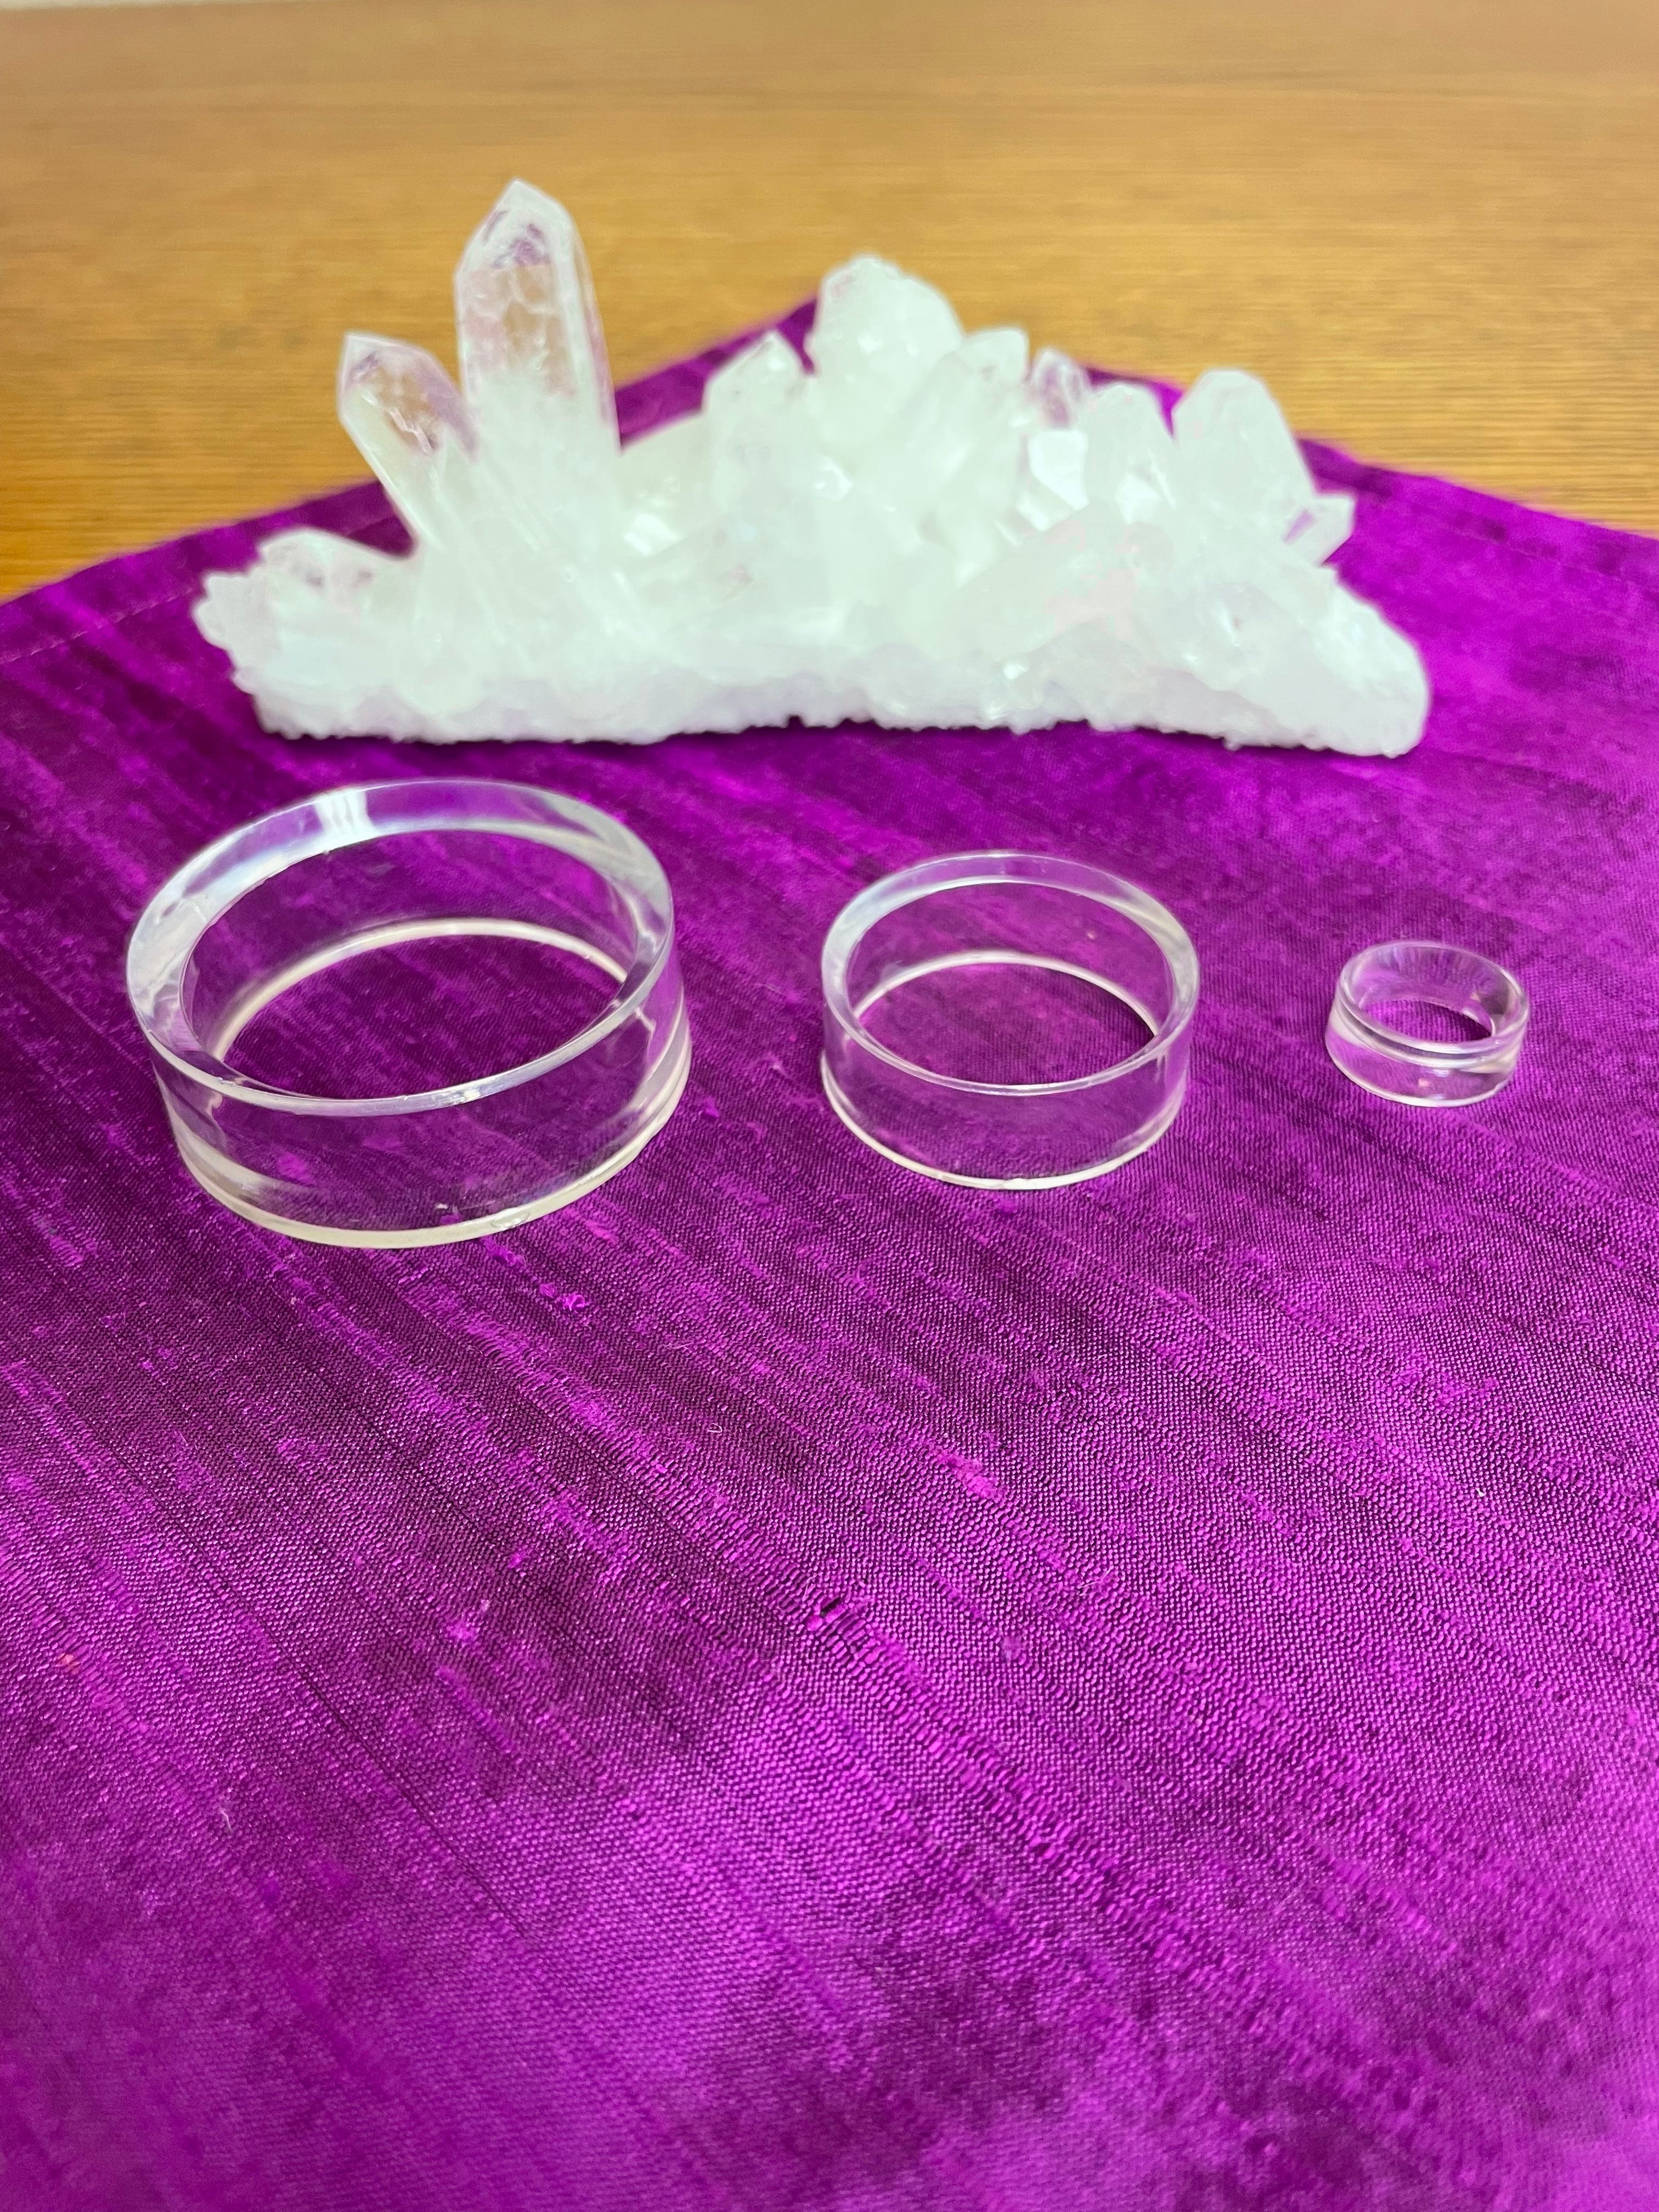 All 3 sizes. Your basic clear plastic ring to display crystal spheres or eggs. Use to keep your crystal spheres and eggs in place, rather than rolling off your altar, table or nightstand - lol. This is the smallest size I offer at approximately 0.6"x0.24" (d/h). The 3rd photo shows all three available sizes. Check out my crystal spheres and my ruby-in-matrix eggs and Judy Hall's The Crystal Bible Books - they are awesome! Cost for small is 25 cents and can only be purchased as an add-on item.